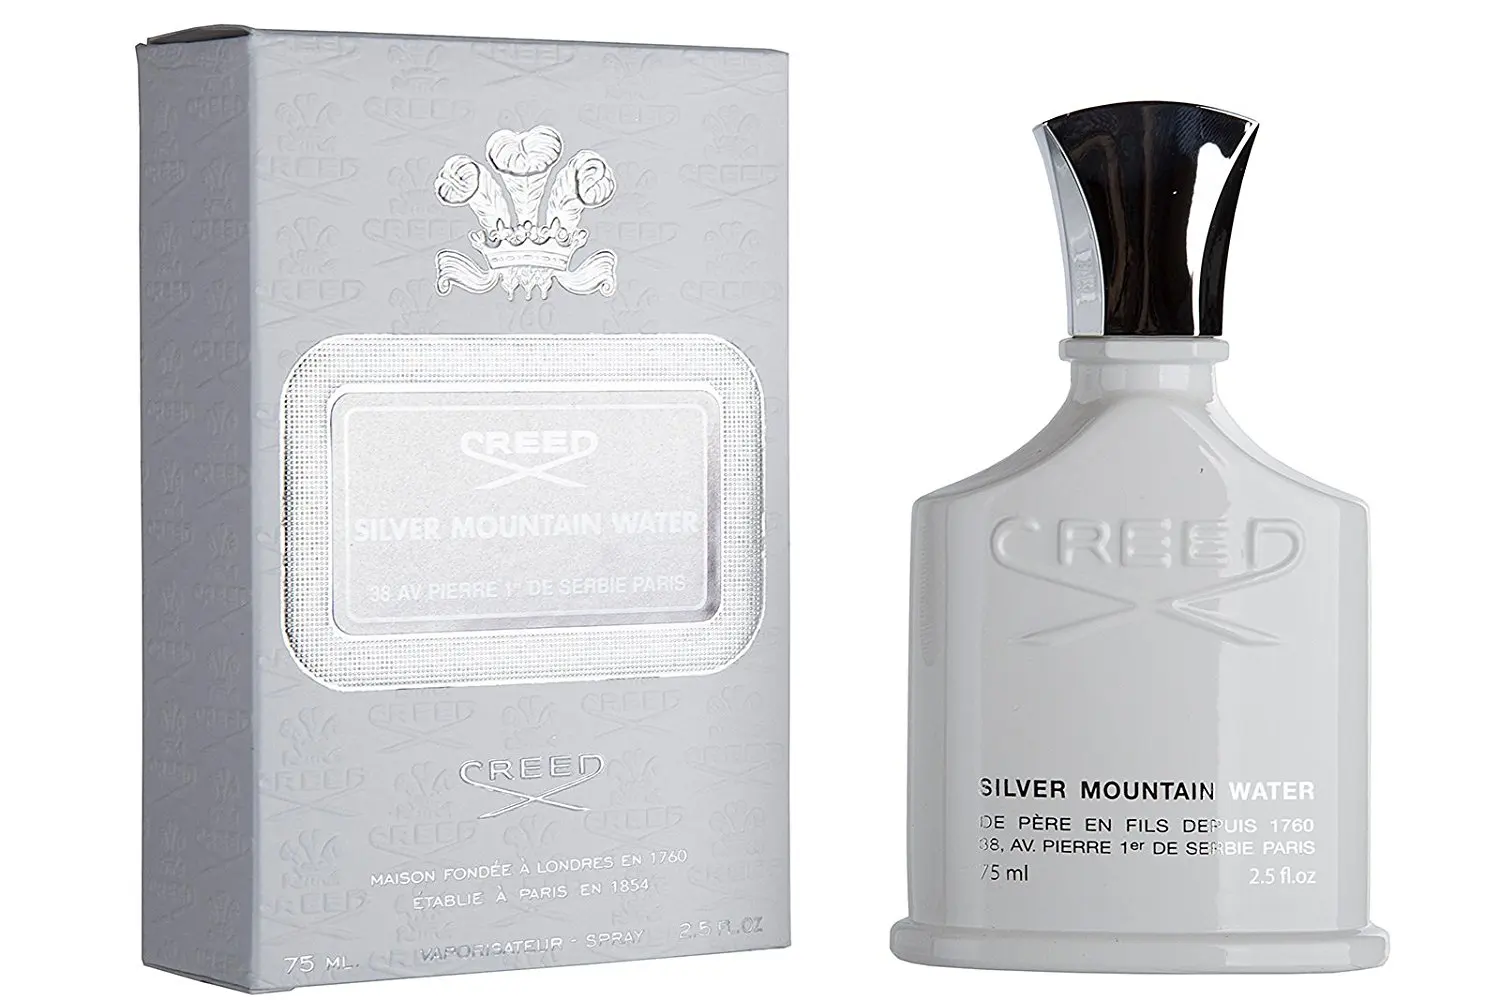 Creed парфюмерная вода silver mountain. Духи Creed Silver Mountain. Парфюм Creed Silver Mountain Water. Creed Silver Mountain Water 75ml. Creed Silver Mountain Water 50ml.